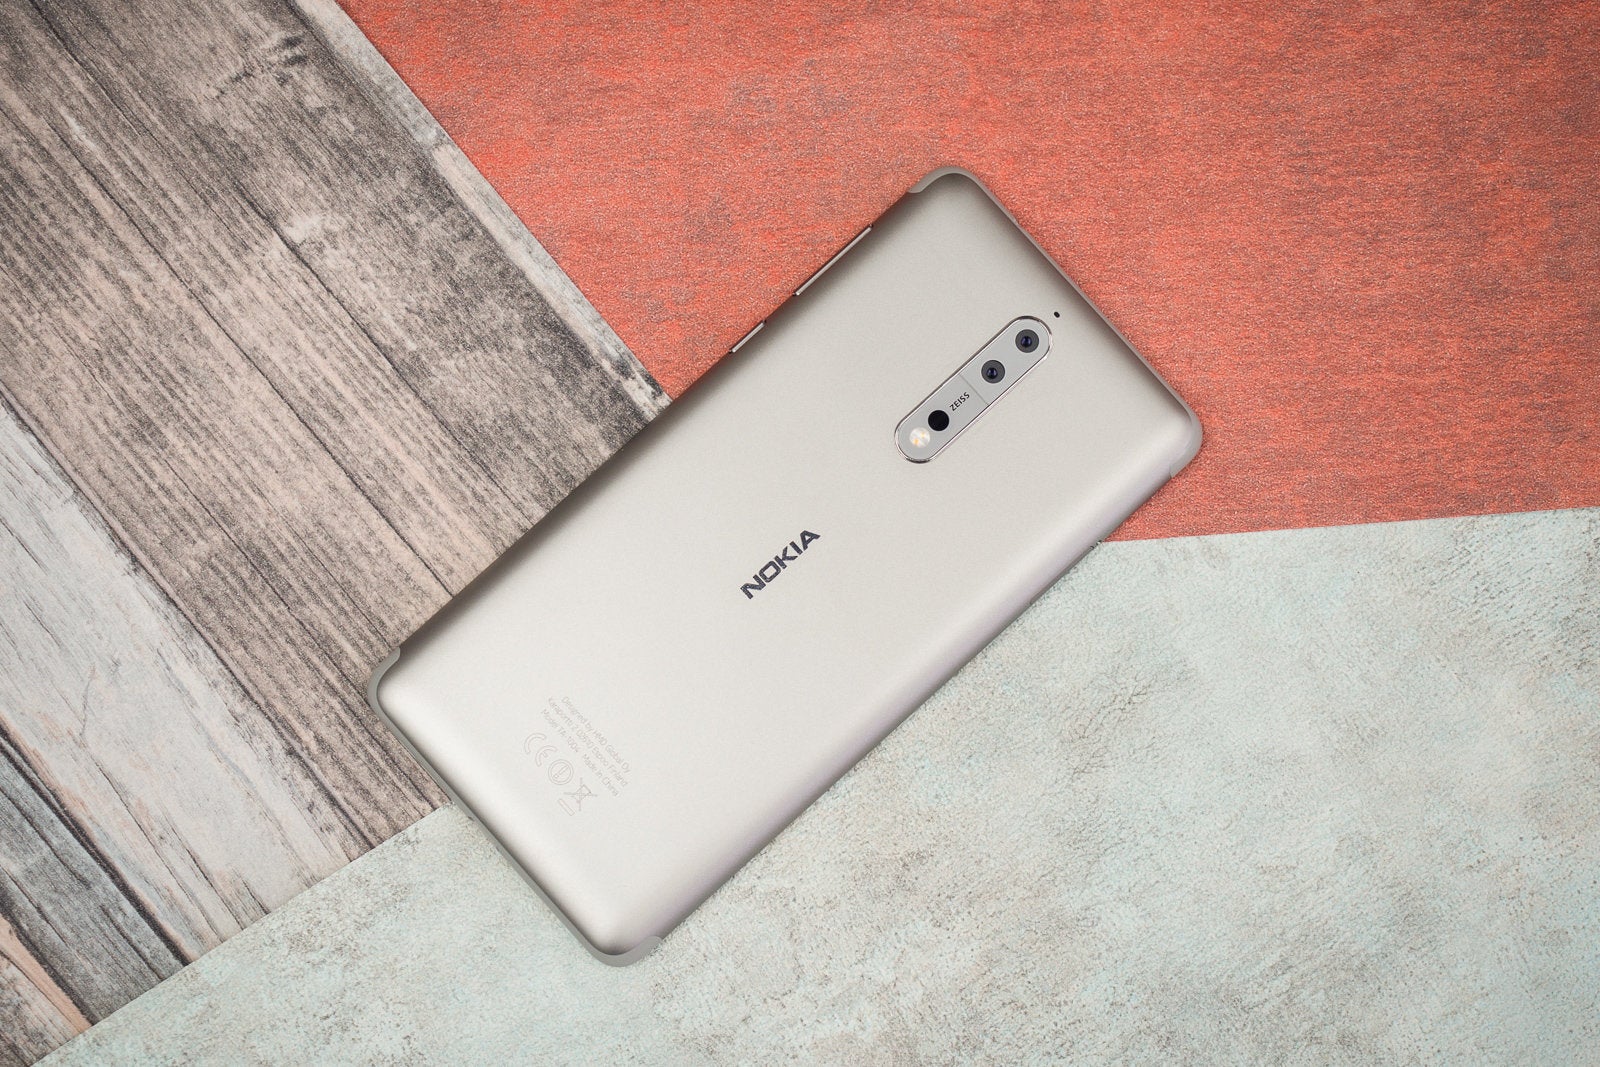 Nokia 8 - Nokia 8.1 spotted with mid-range specs and Android 9 Pie